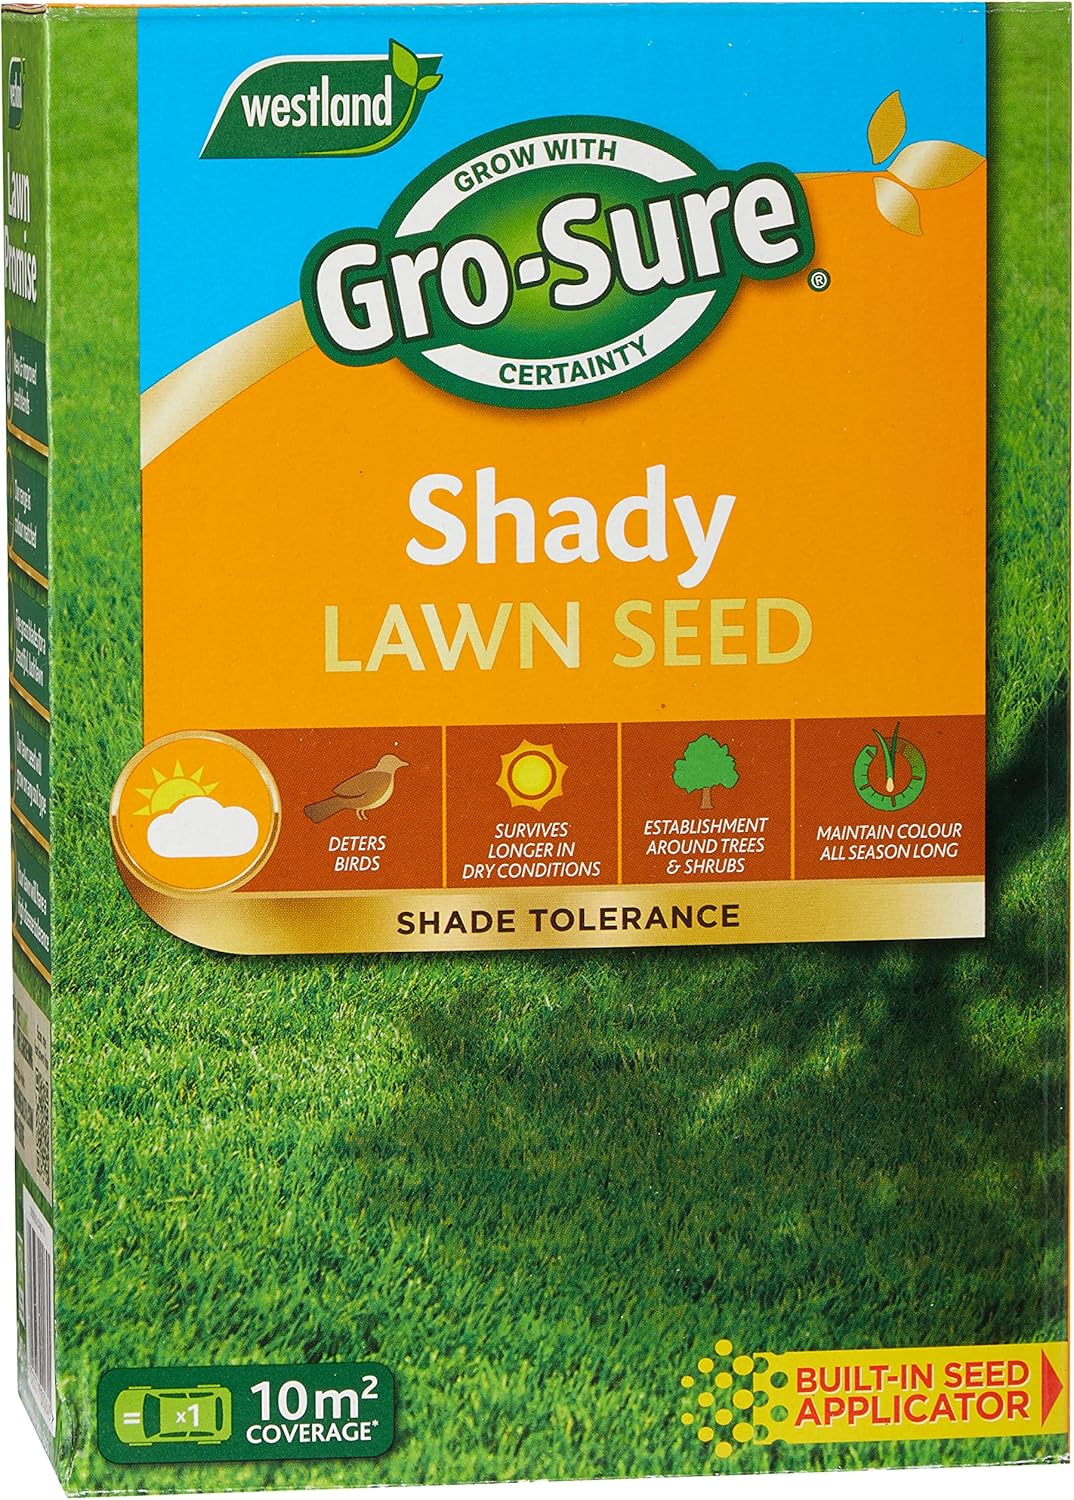 Gro-Sure 20500185 Shady Lawn Seed, 10 m2, 300 g, Green?20500185